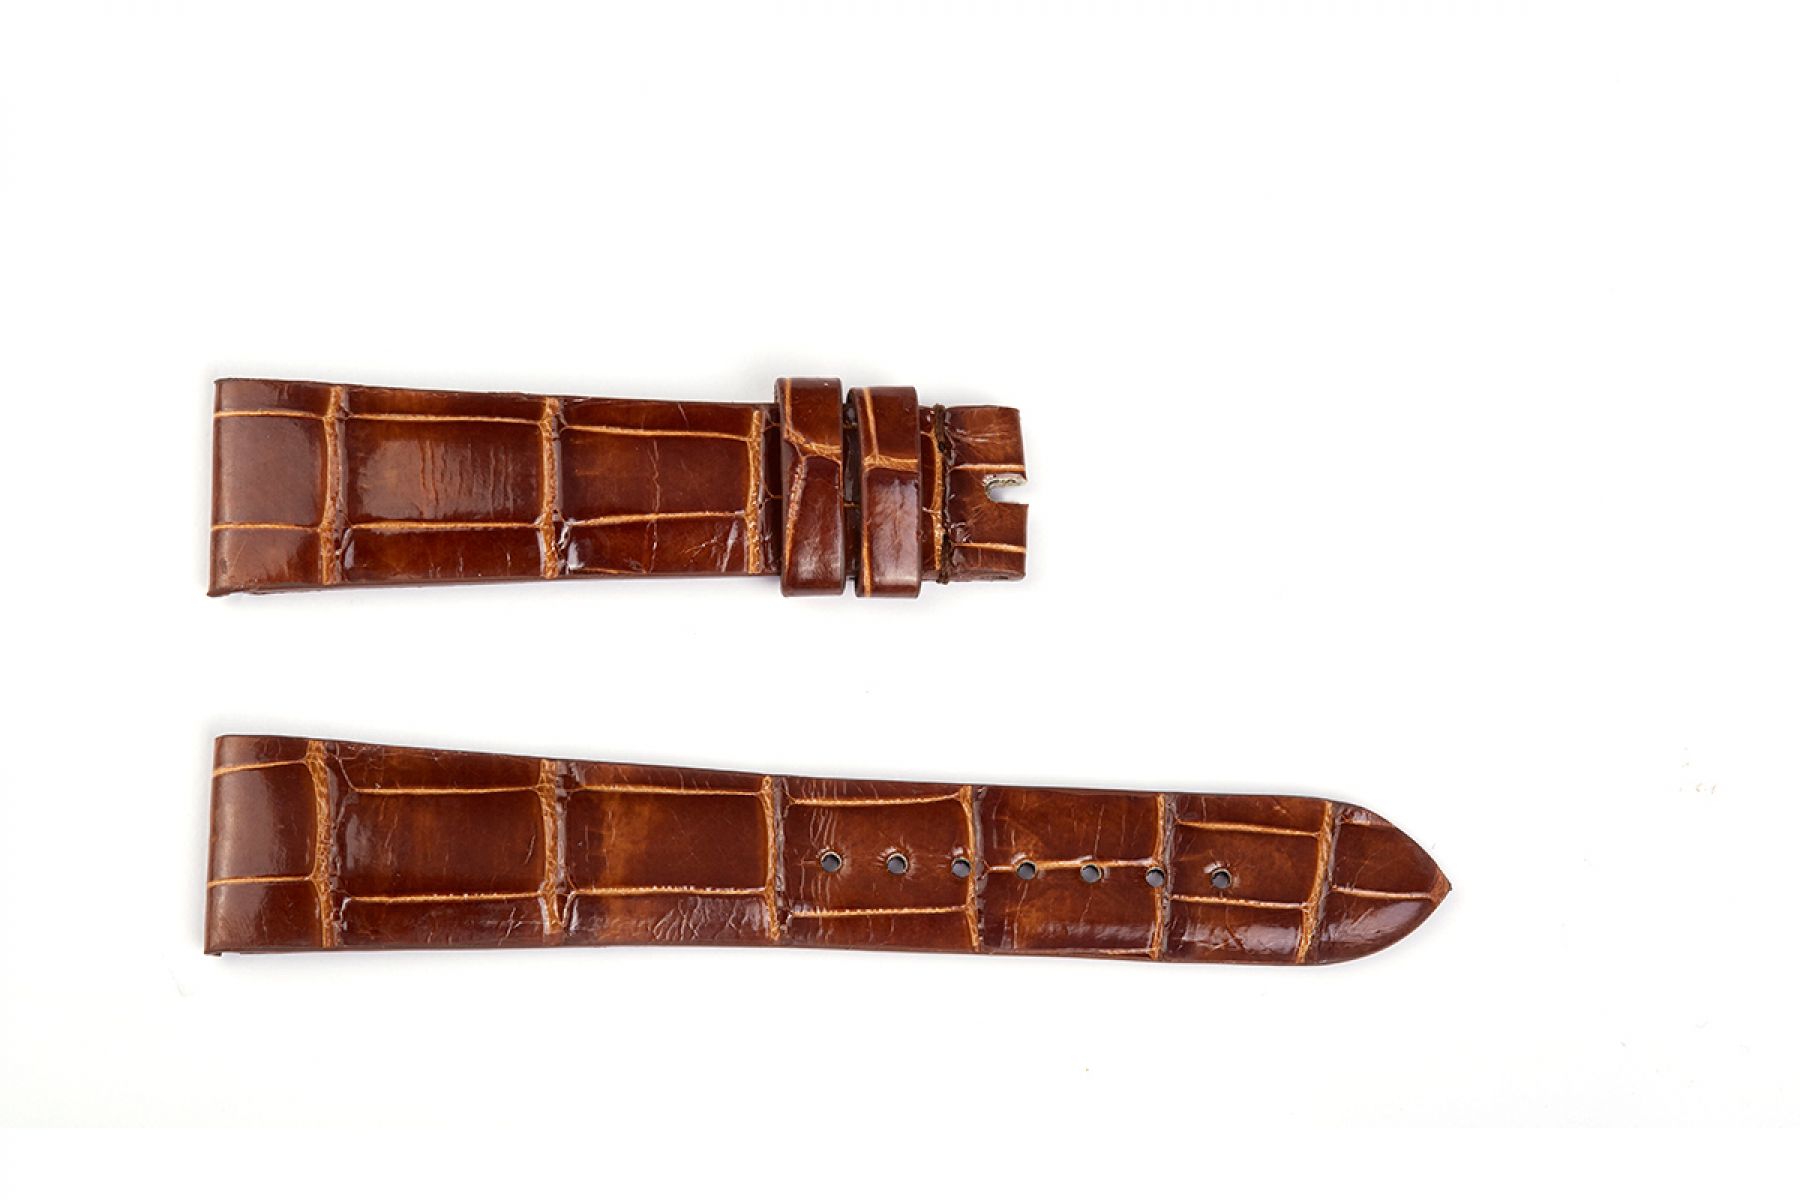 Turtle Brown Gloss Alligator leather strap Patek Philippe style